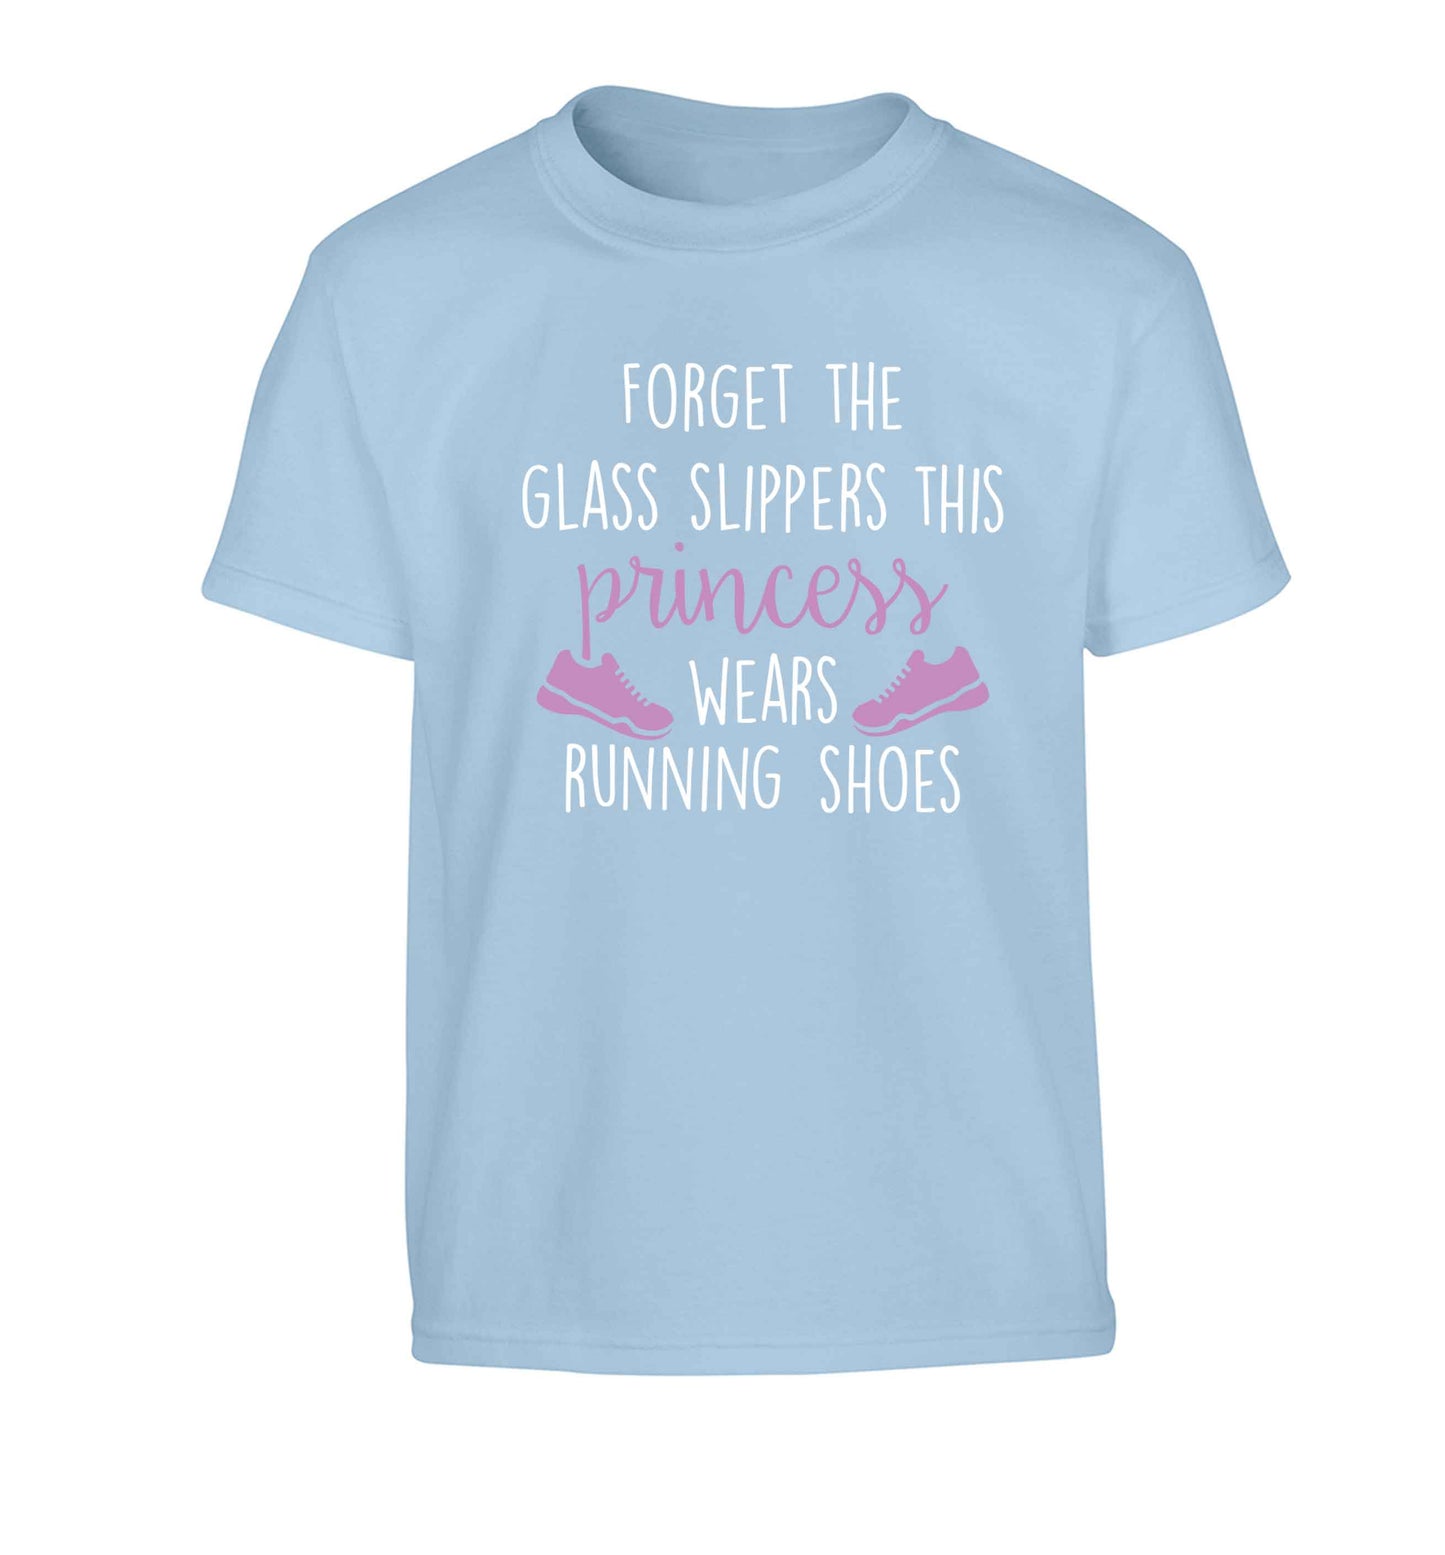 Forget the glass slippers this princess wears running shoes Children's light blue Tshirt 12-13 Years